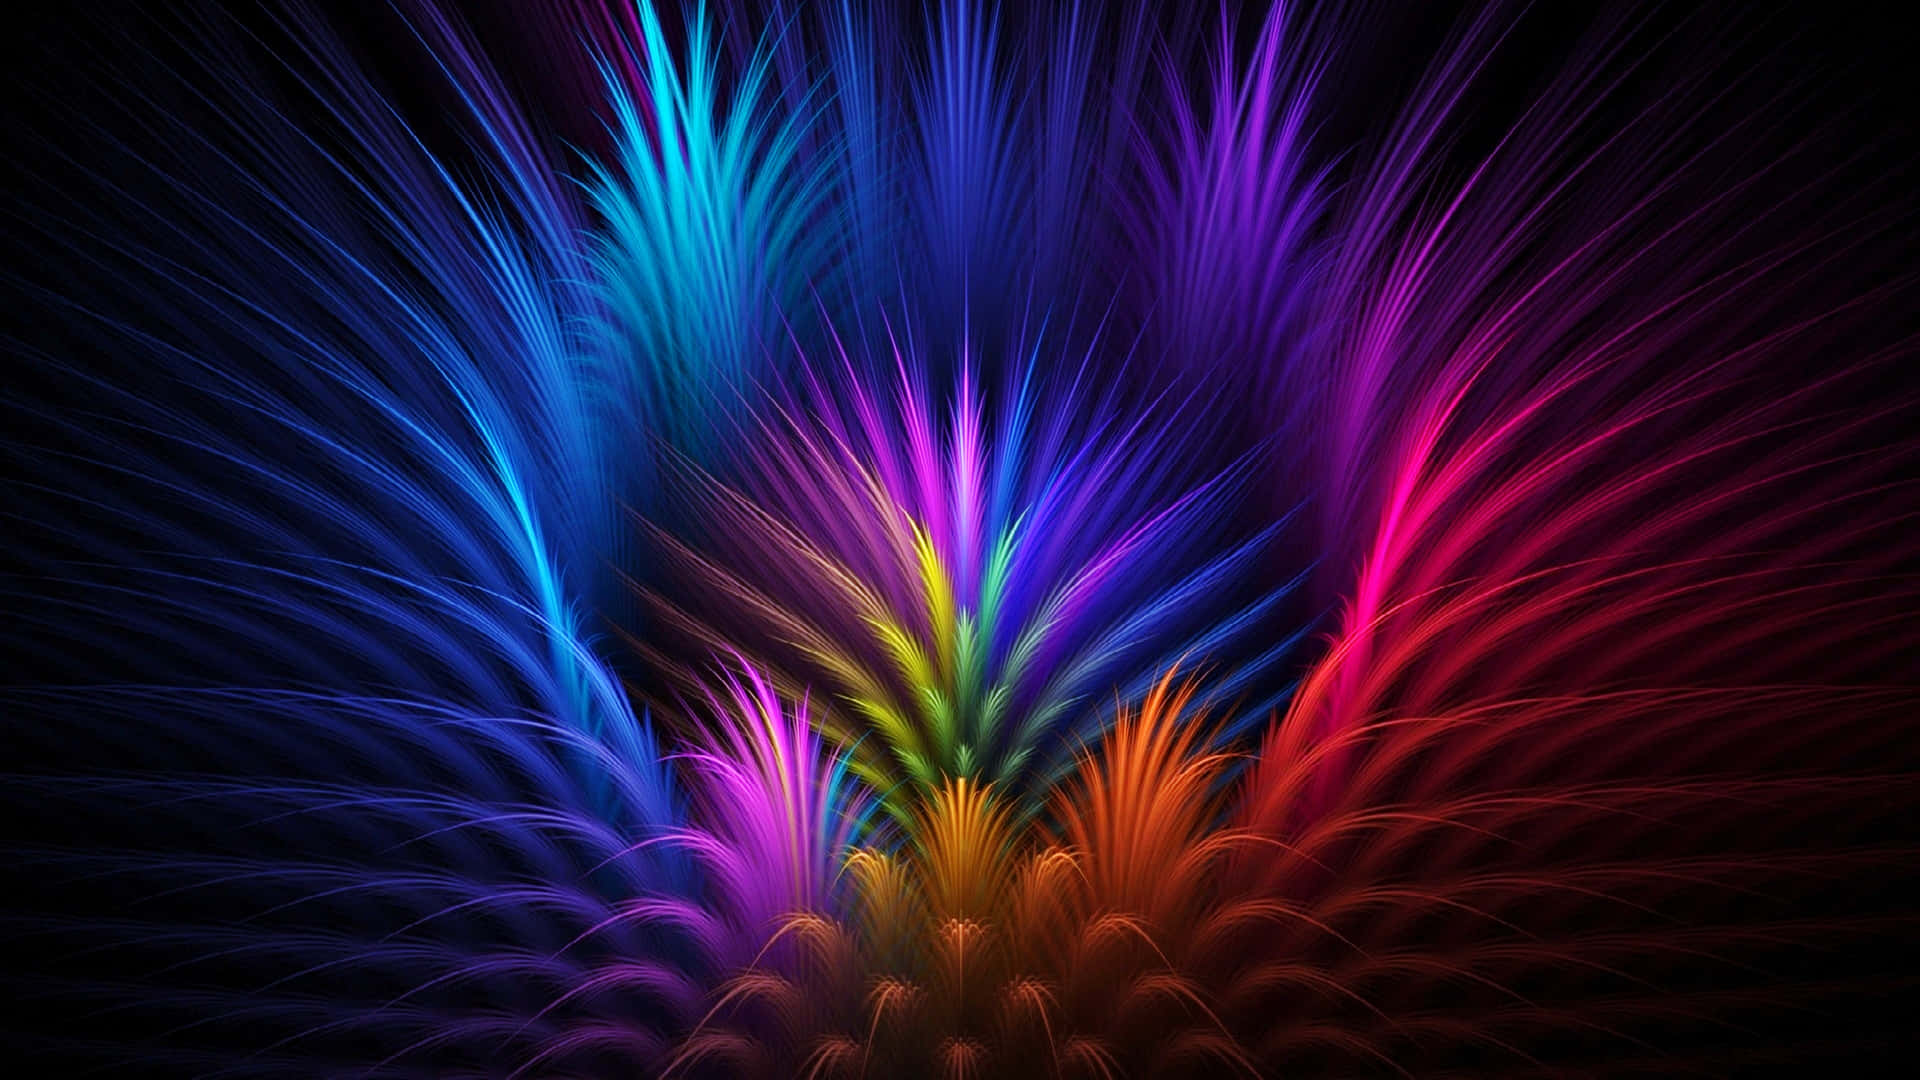 Vibrant Abstract Light Feathers Wallpaper